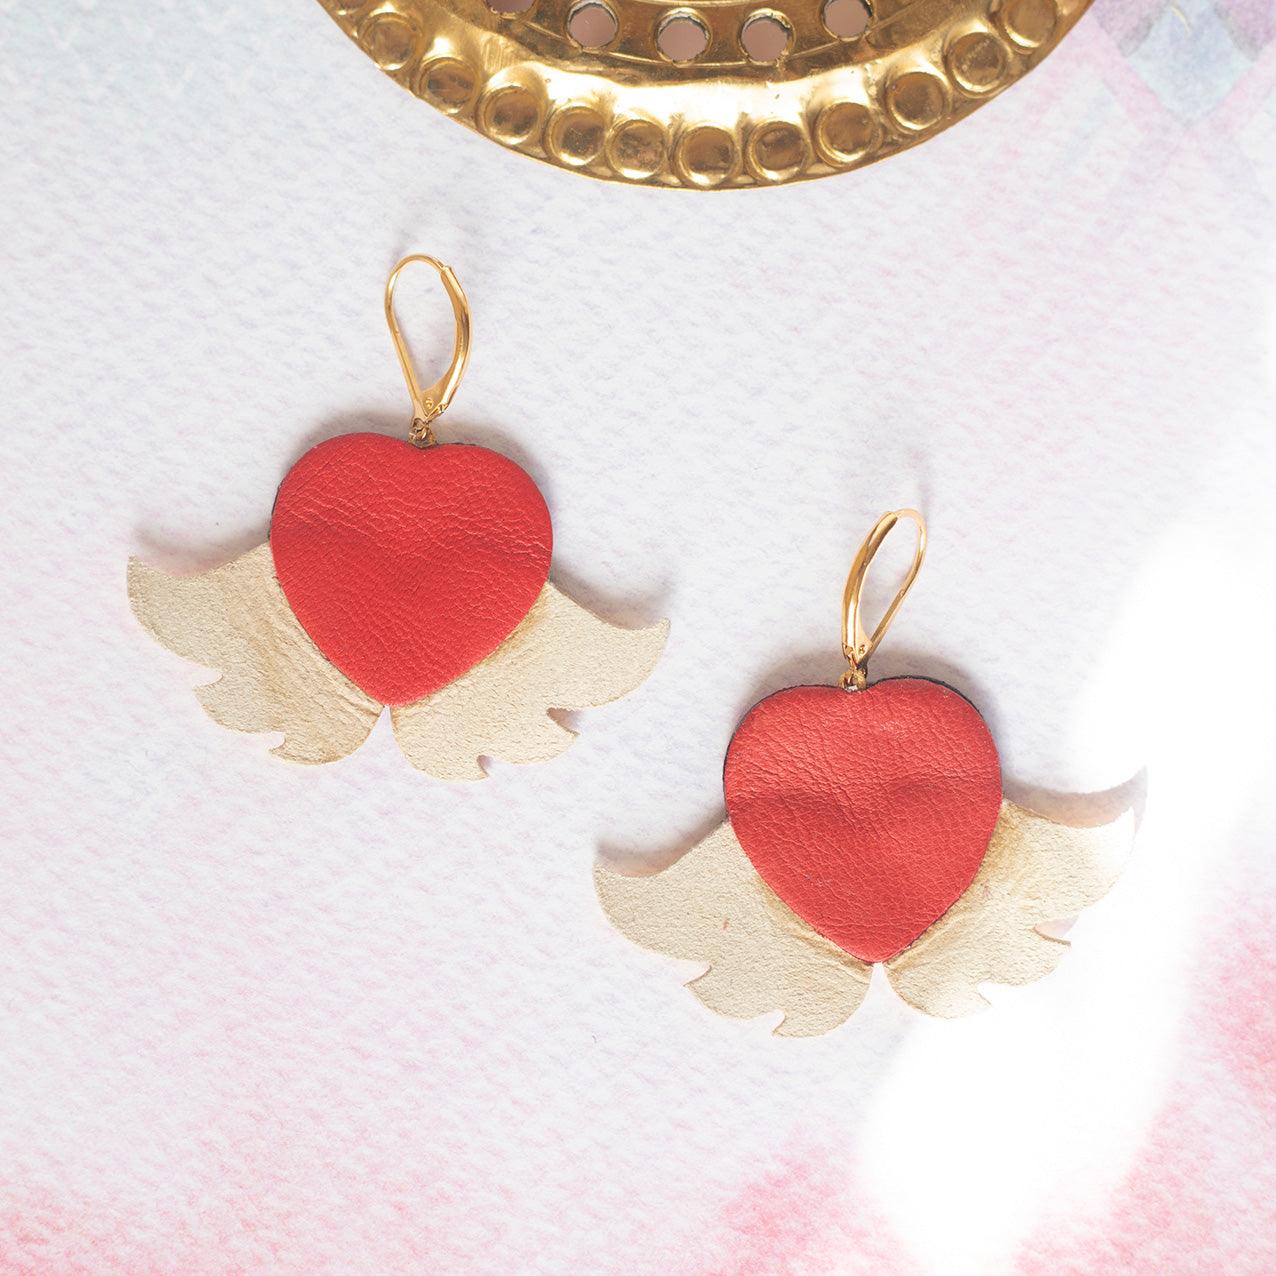 Winged hearts earrings in gold and metallic red leather